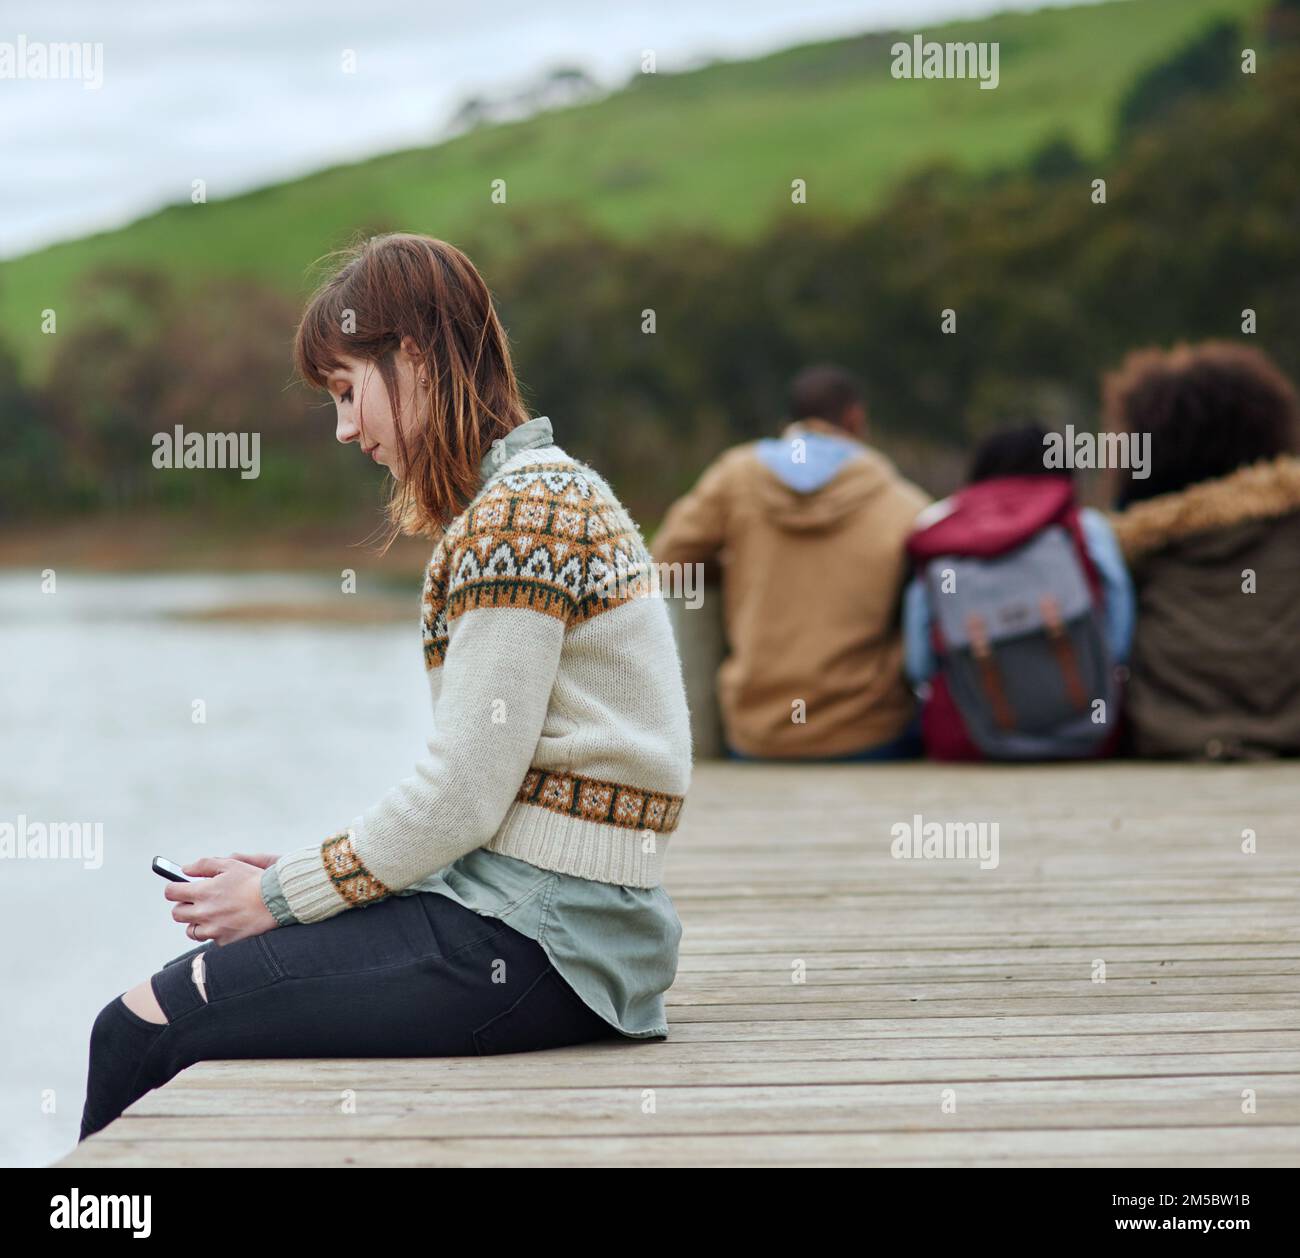 Enjoying a moment to herself. a young woman sending a text message while sitting on the pier by a lake. Stock Photo